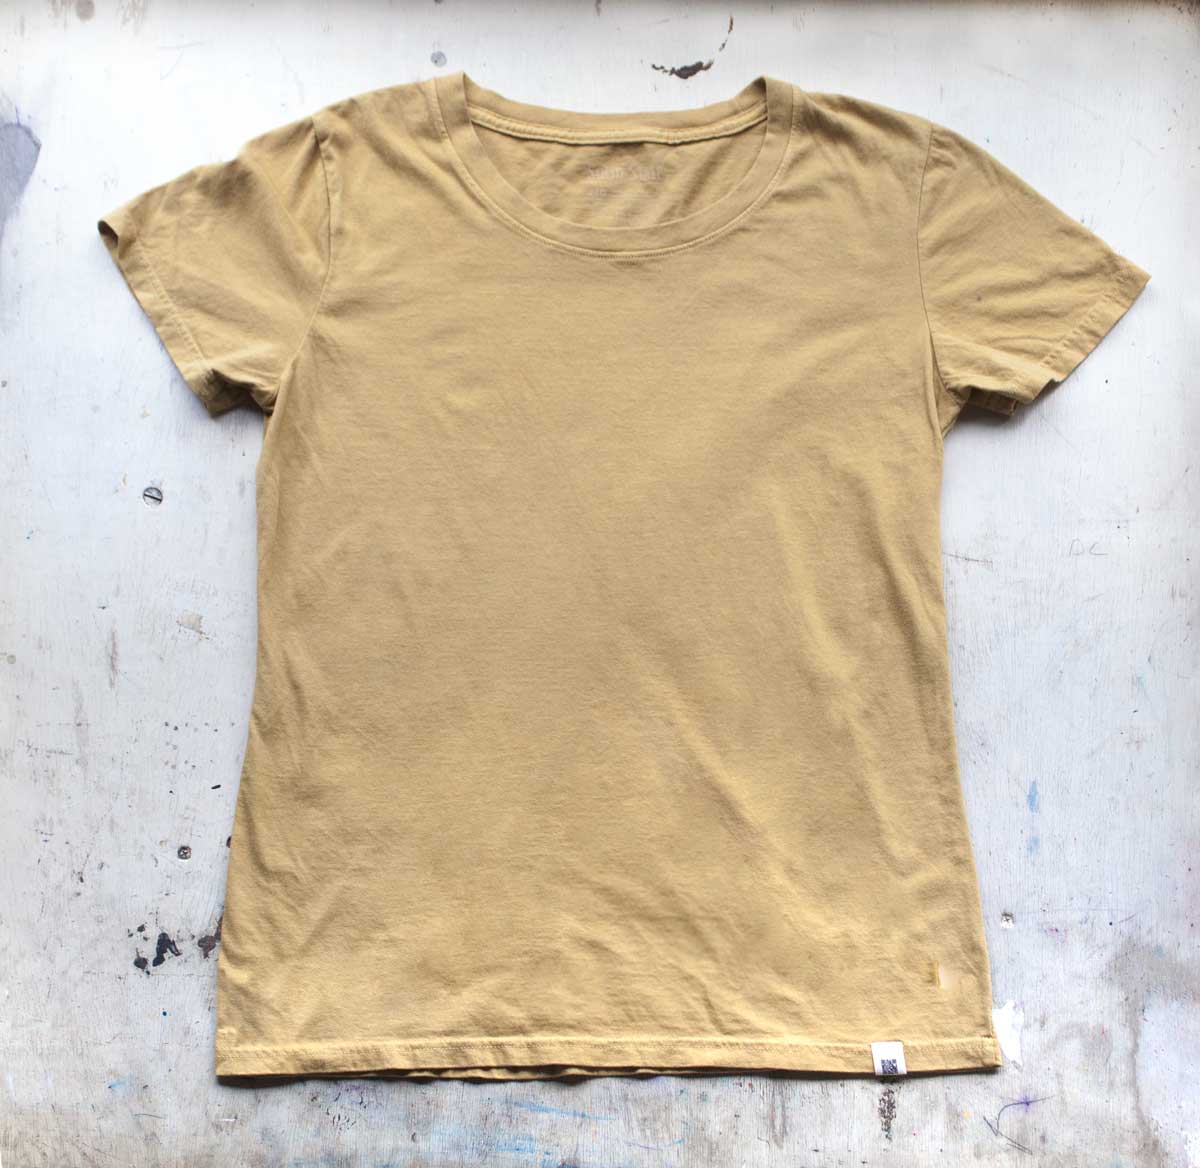 A Solid State Clothing Natural Dye t-shirt lies against a white background. The color of the shirt is Citrine, which is a darker, muted shade of yellow